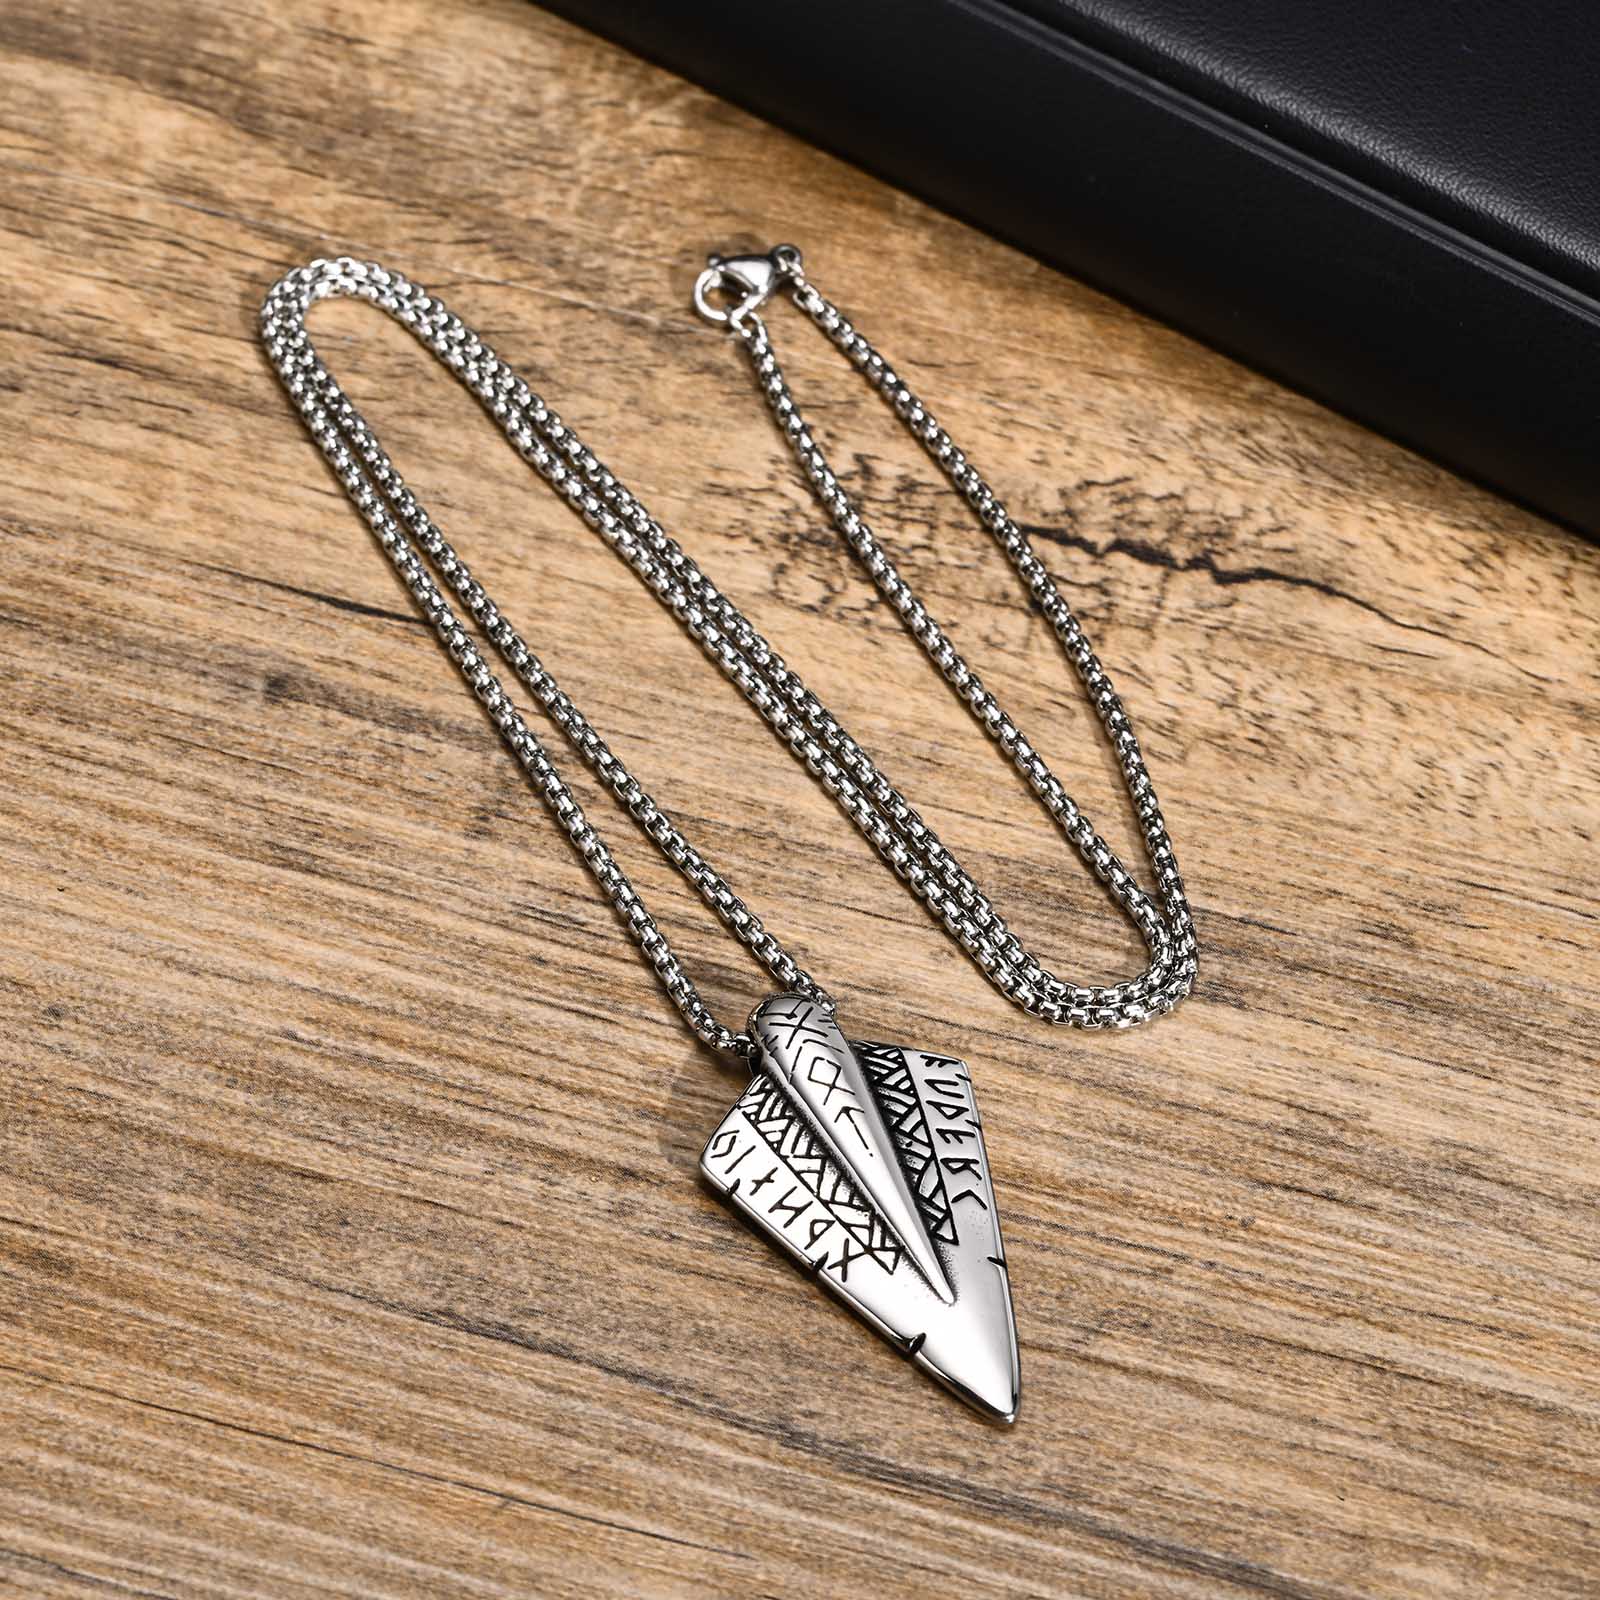 Men's Metal Stainless Steel Vintage Link Chain Geometric Necklace